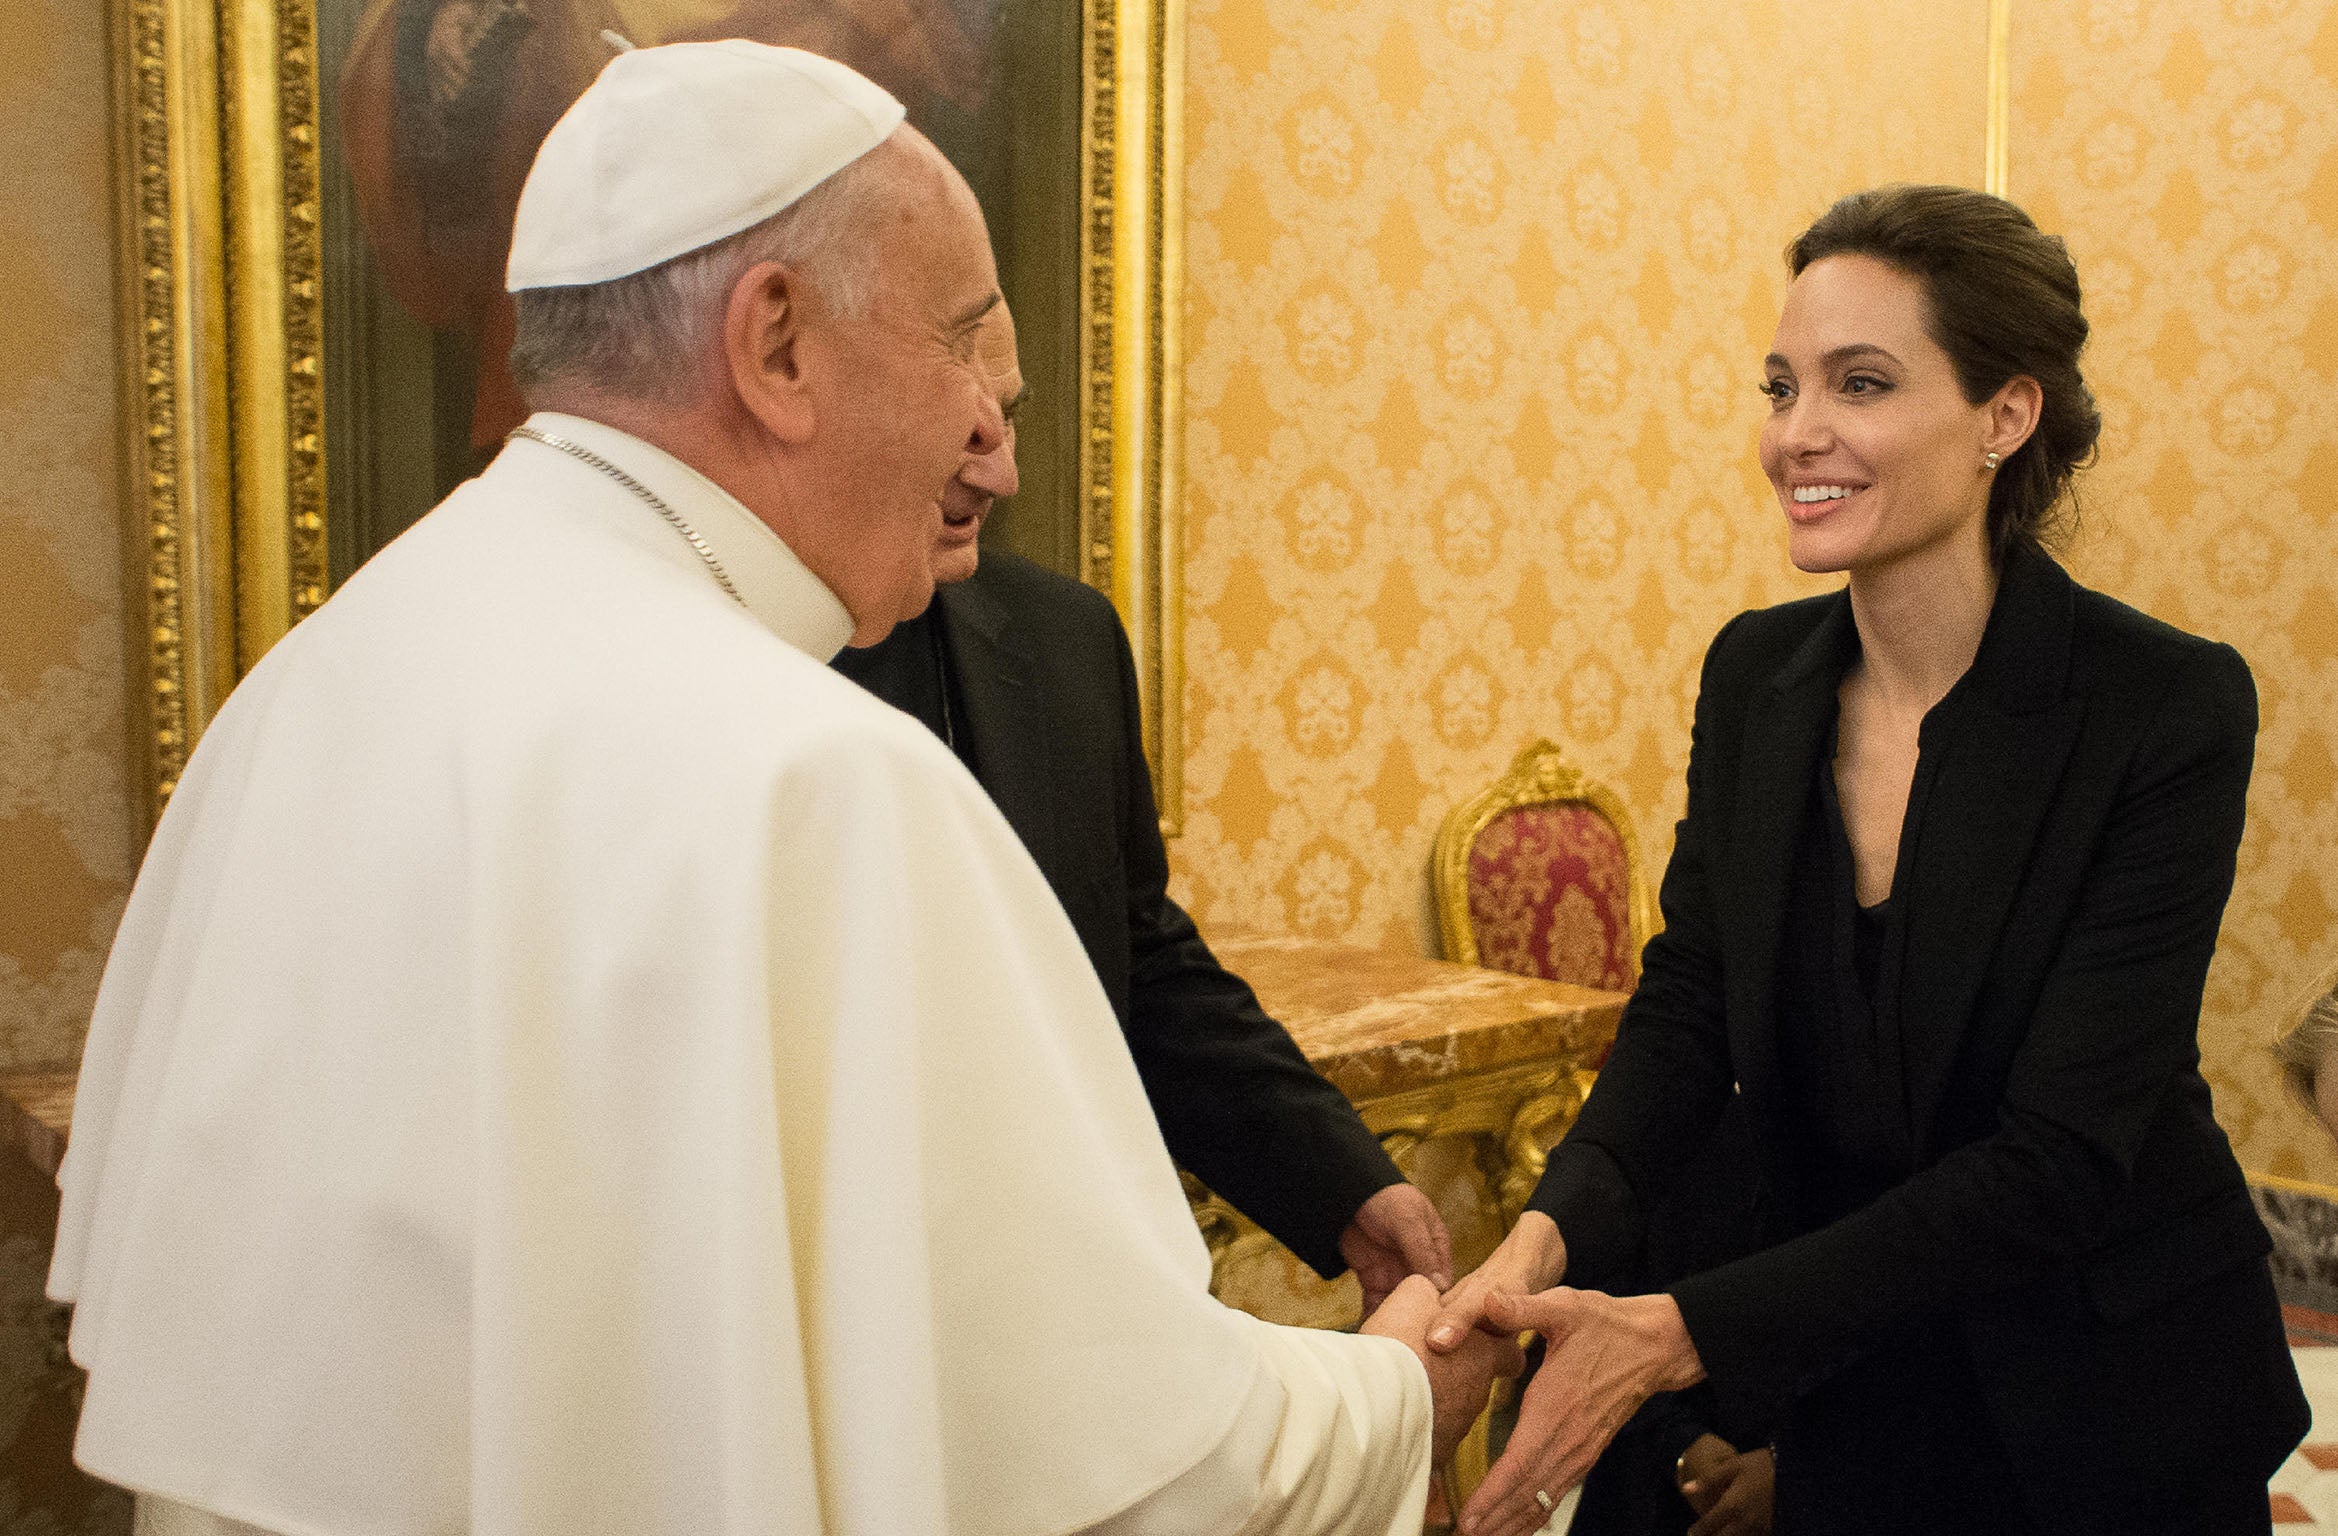 Jolie greets the pontiff on her official visit